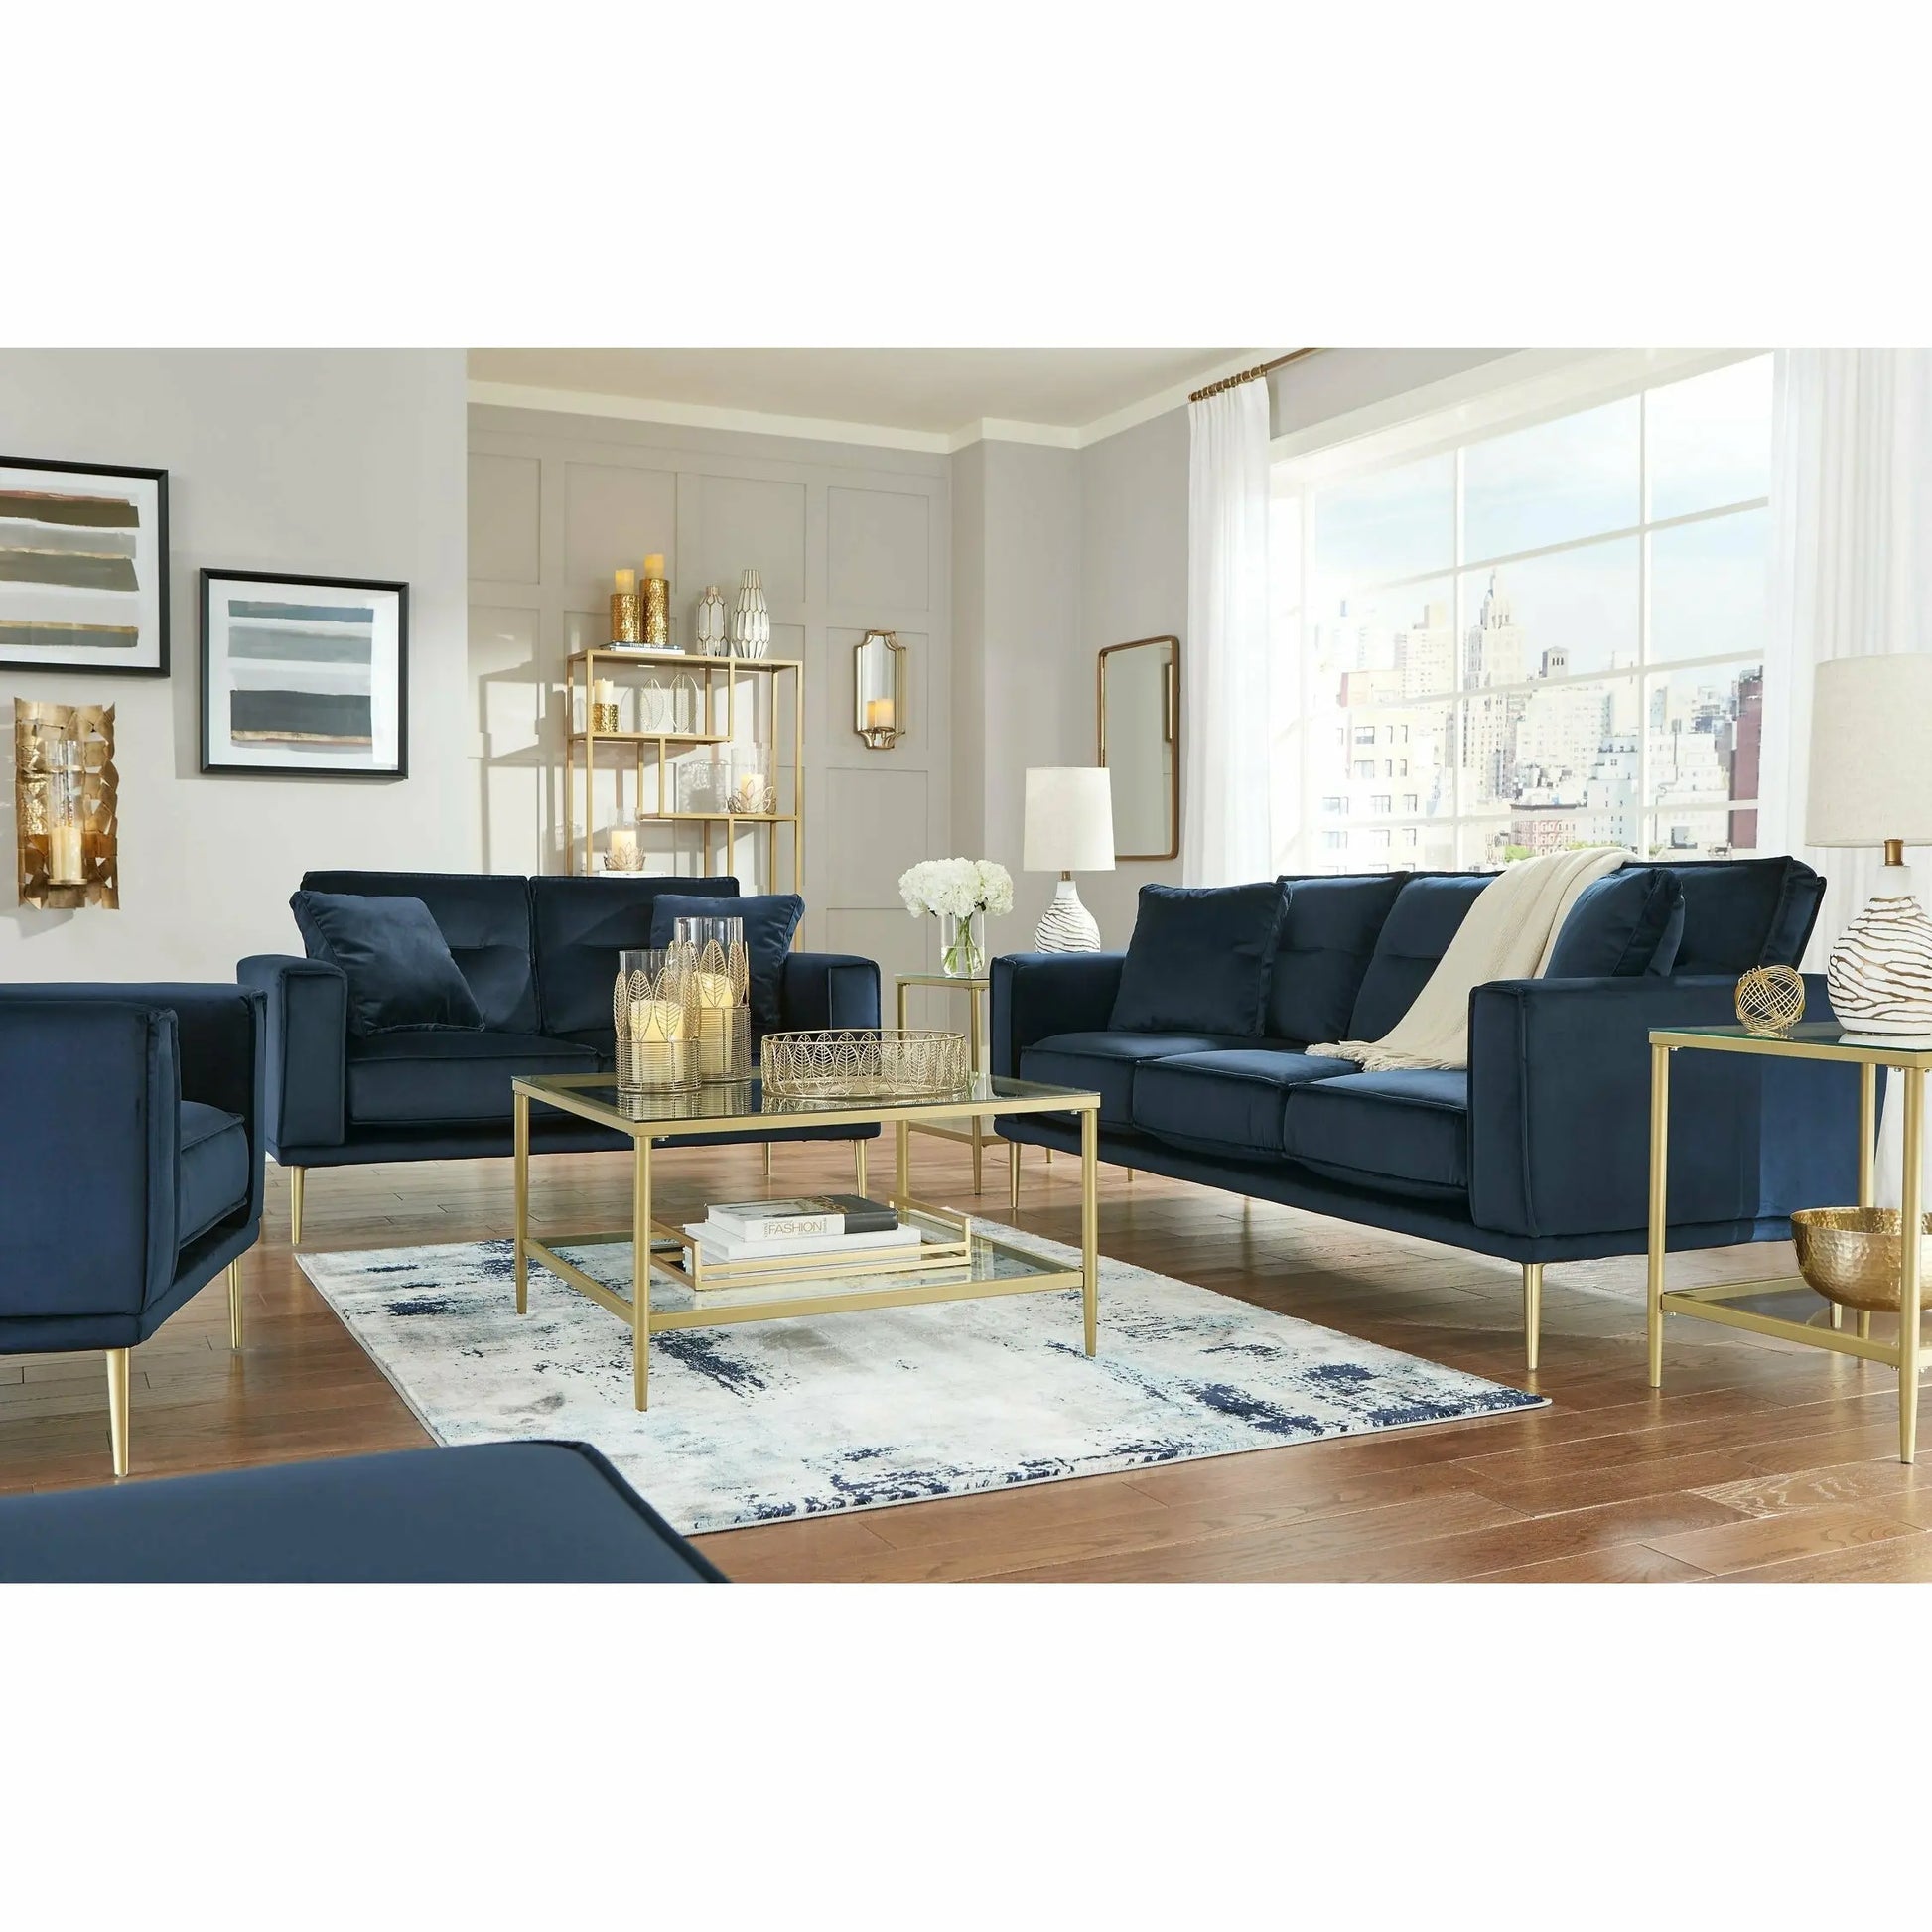 Macleary Sofa, Loveseat and Chair Ashley Furniture HomeStore